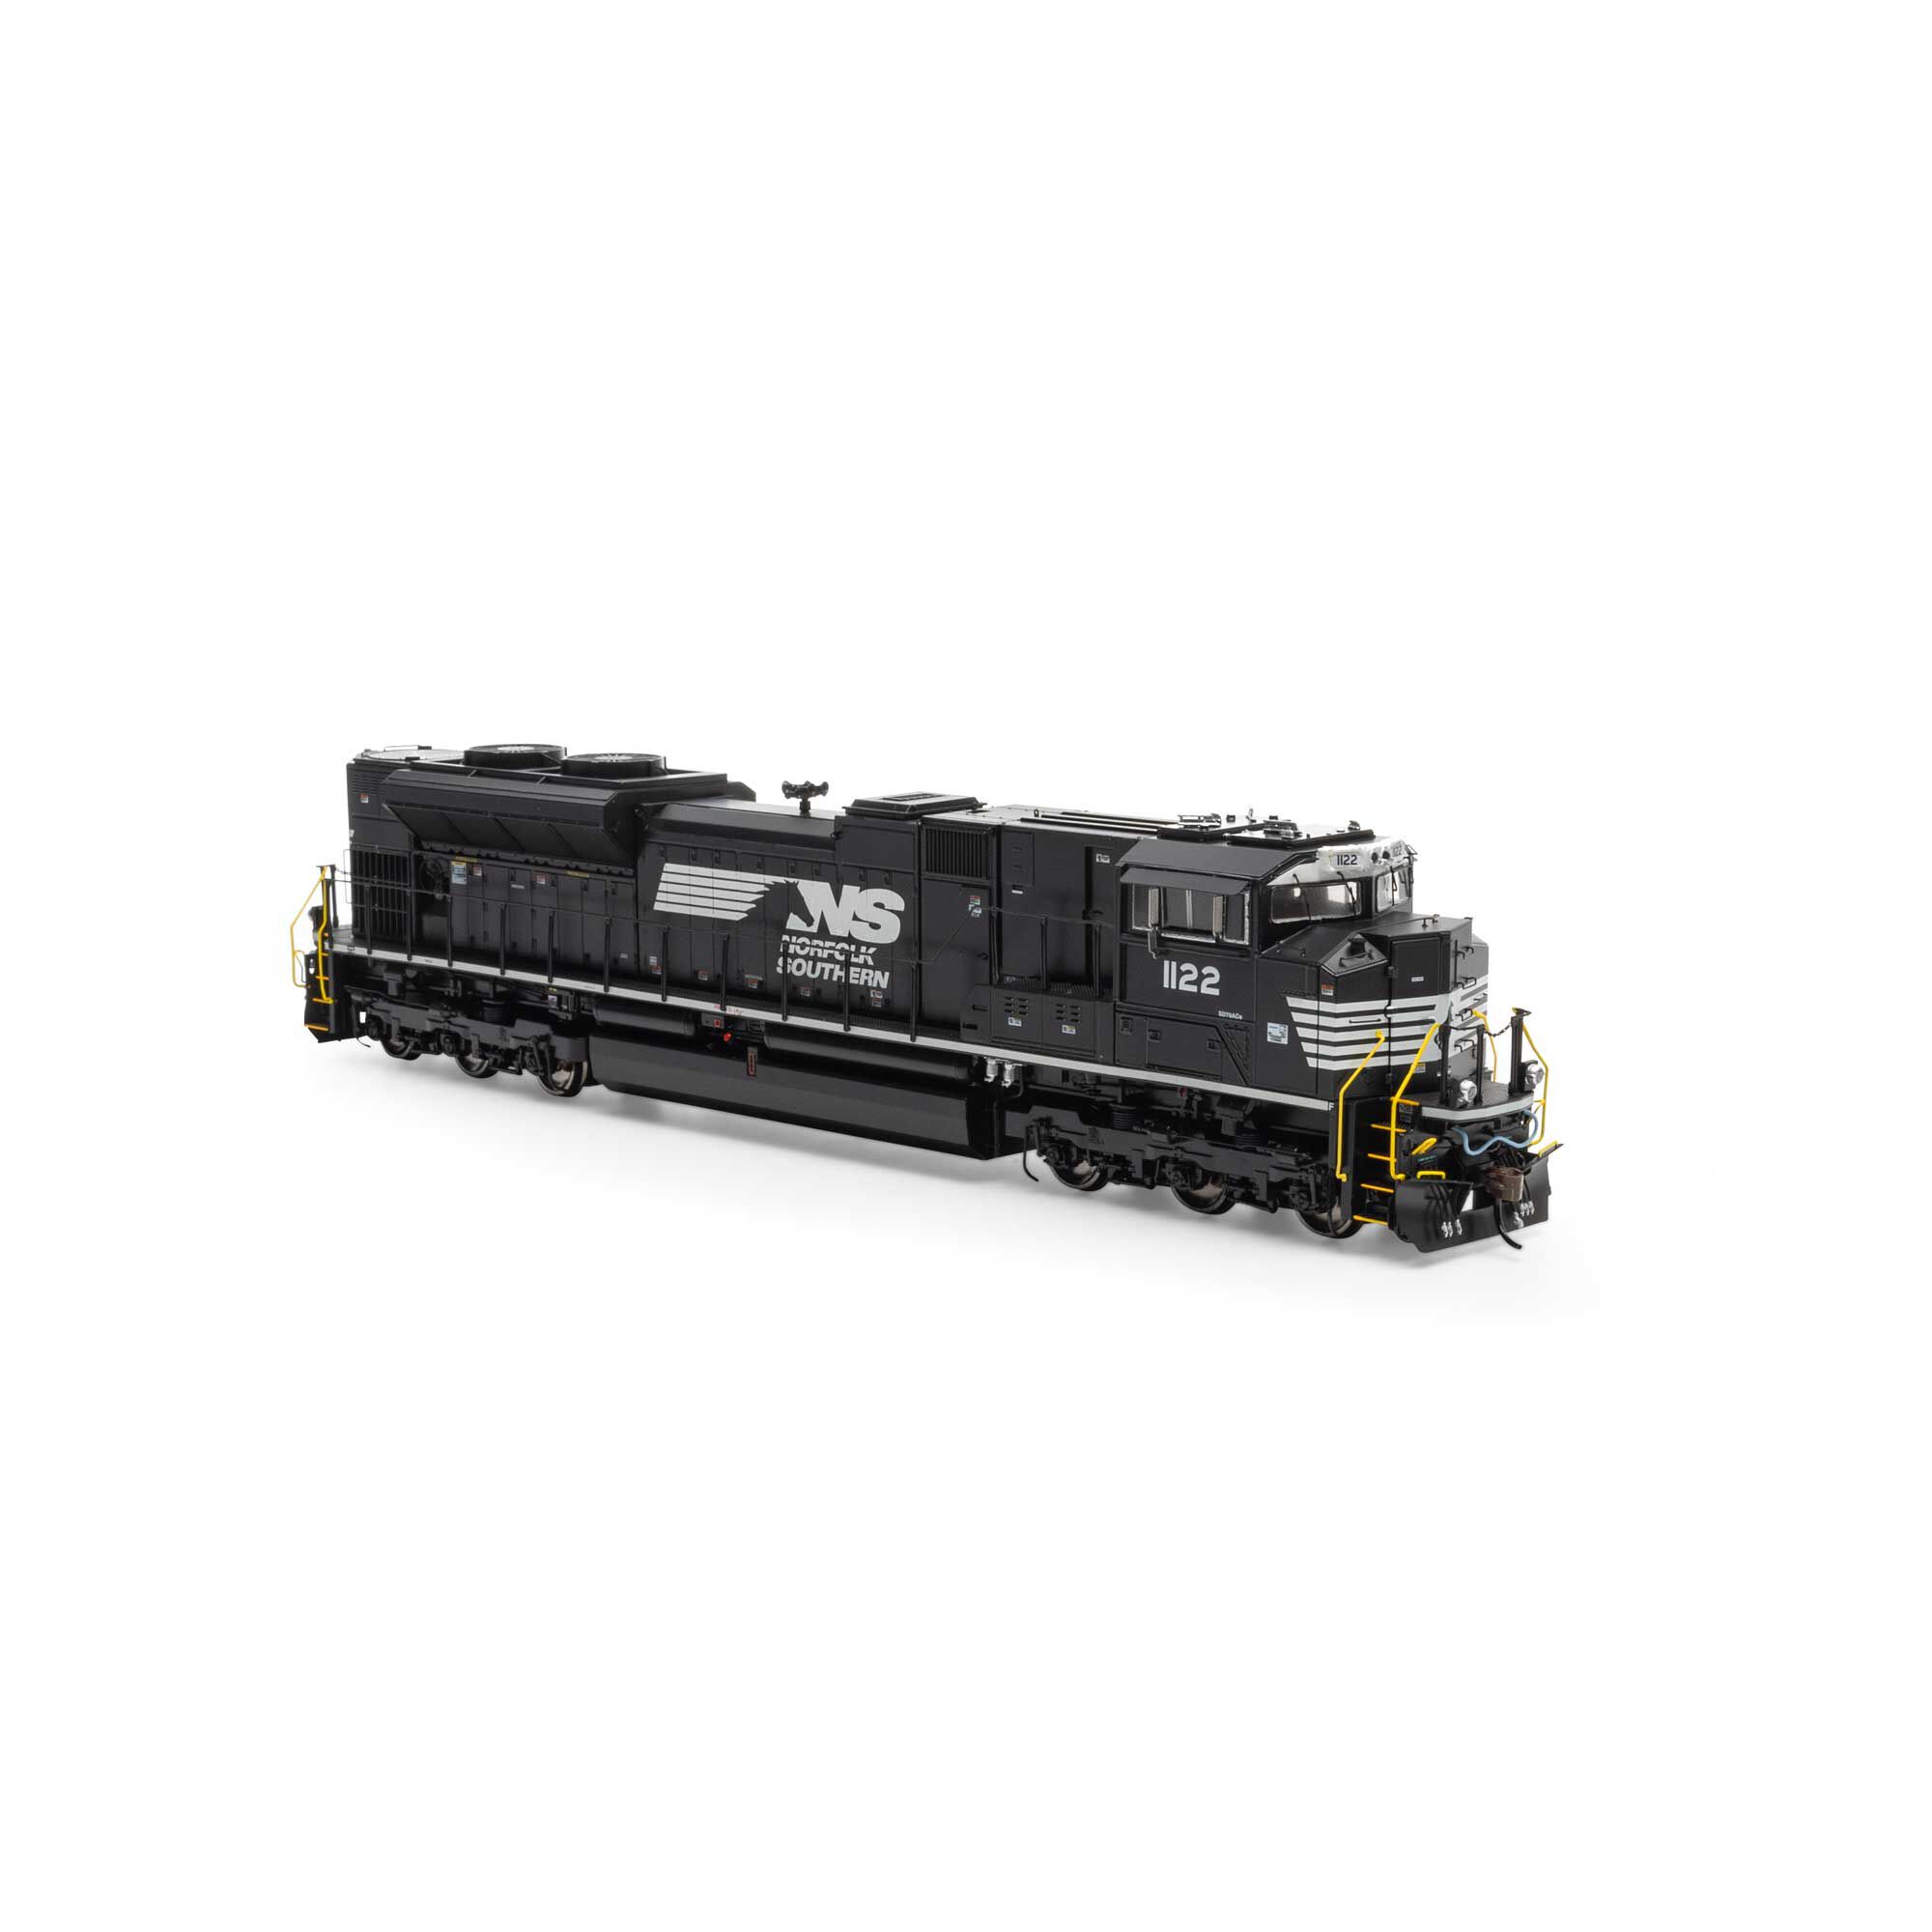 HO SD70ACe Locomotive with DCC & Sound, NS #1122 Model Train | Athearn